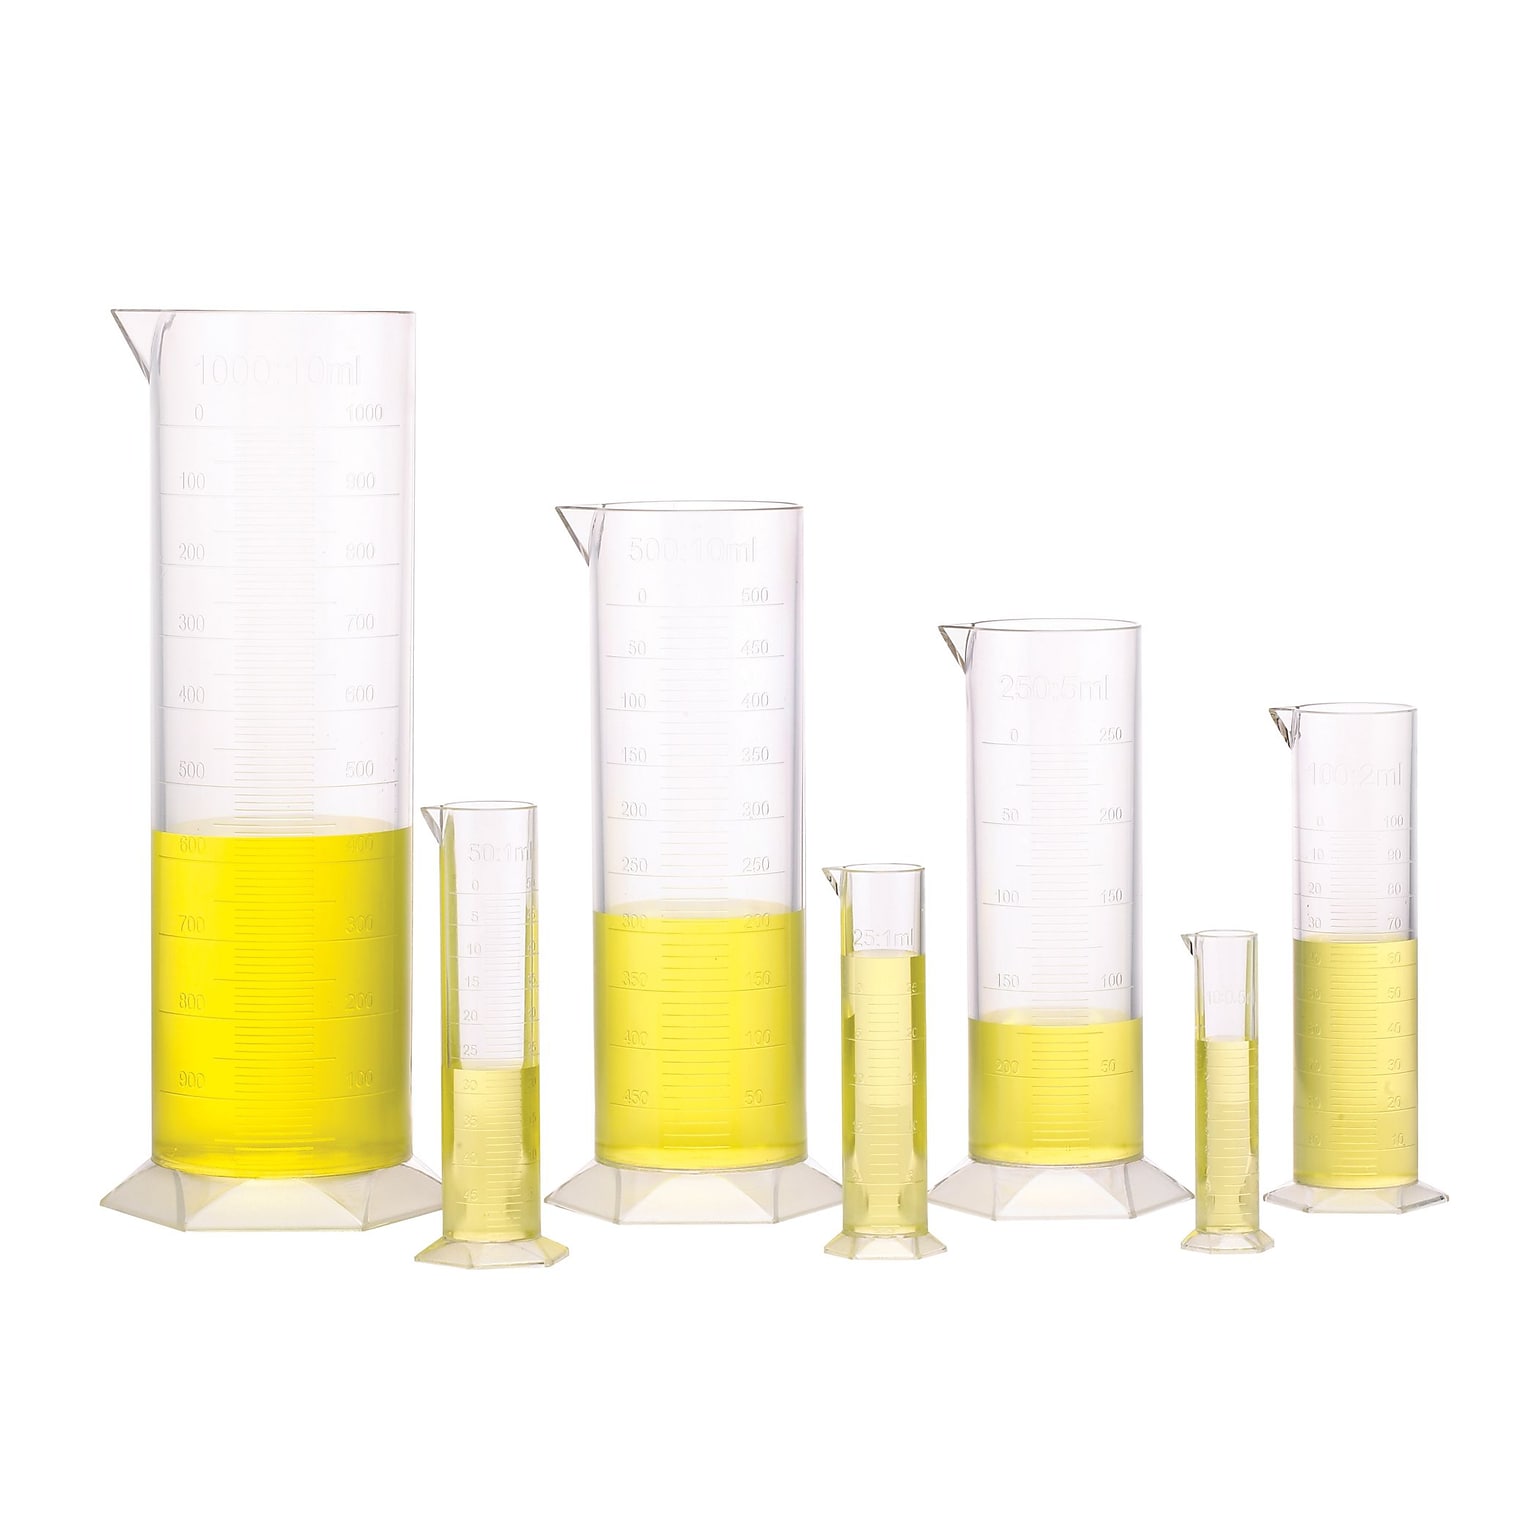 Learning Advantage Graduated Cylinders, Ages 9-18 (CTU7707)